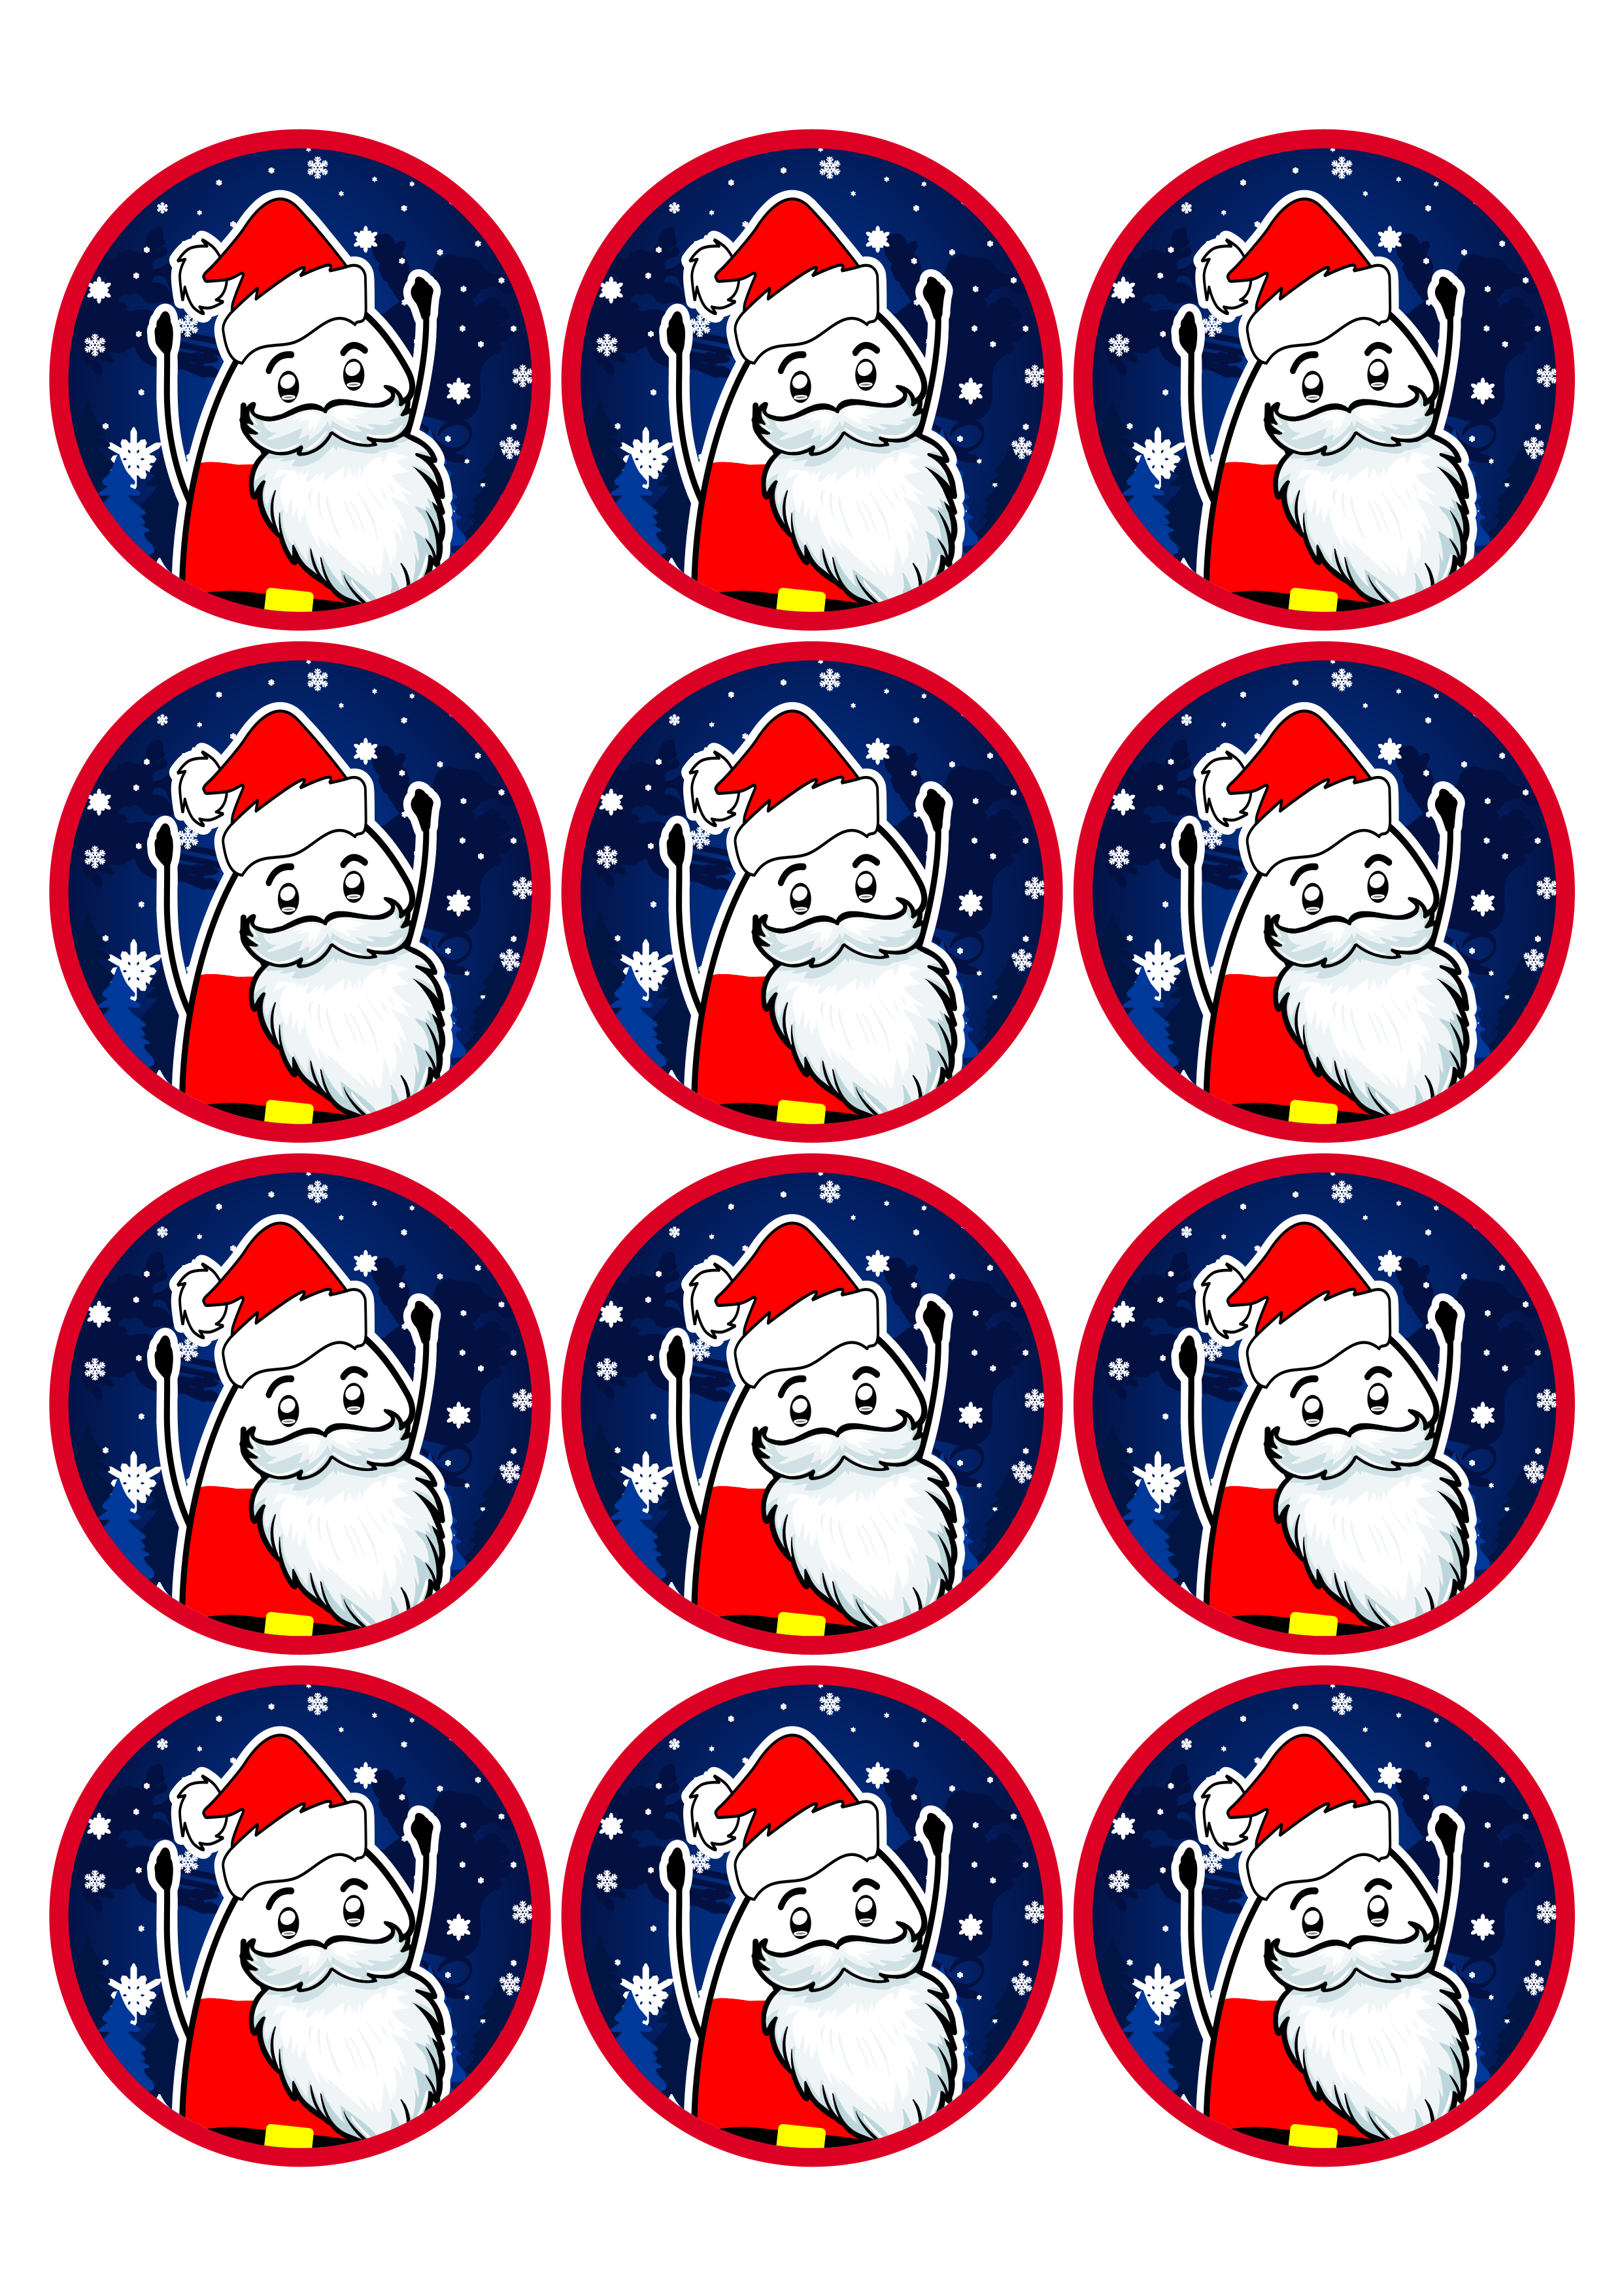 Flork of cows papai noel adesivos stickers tags 12 unidades png